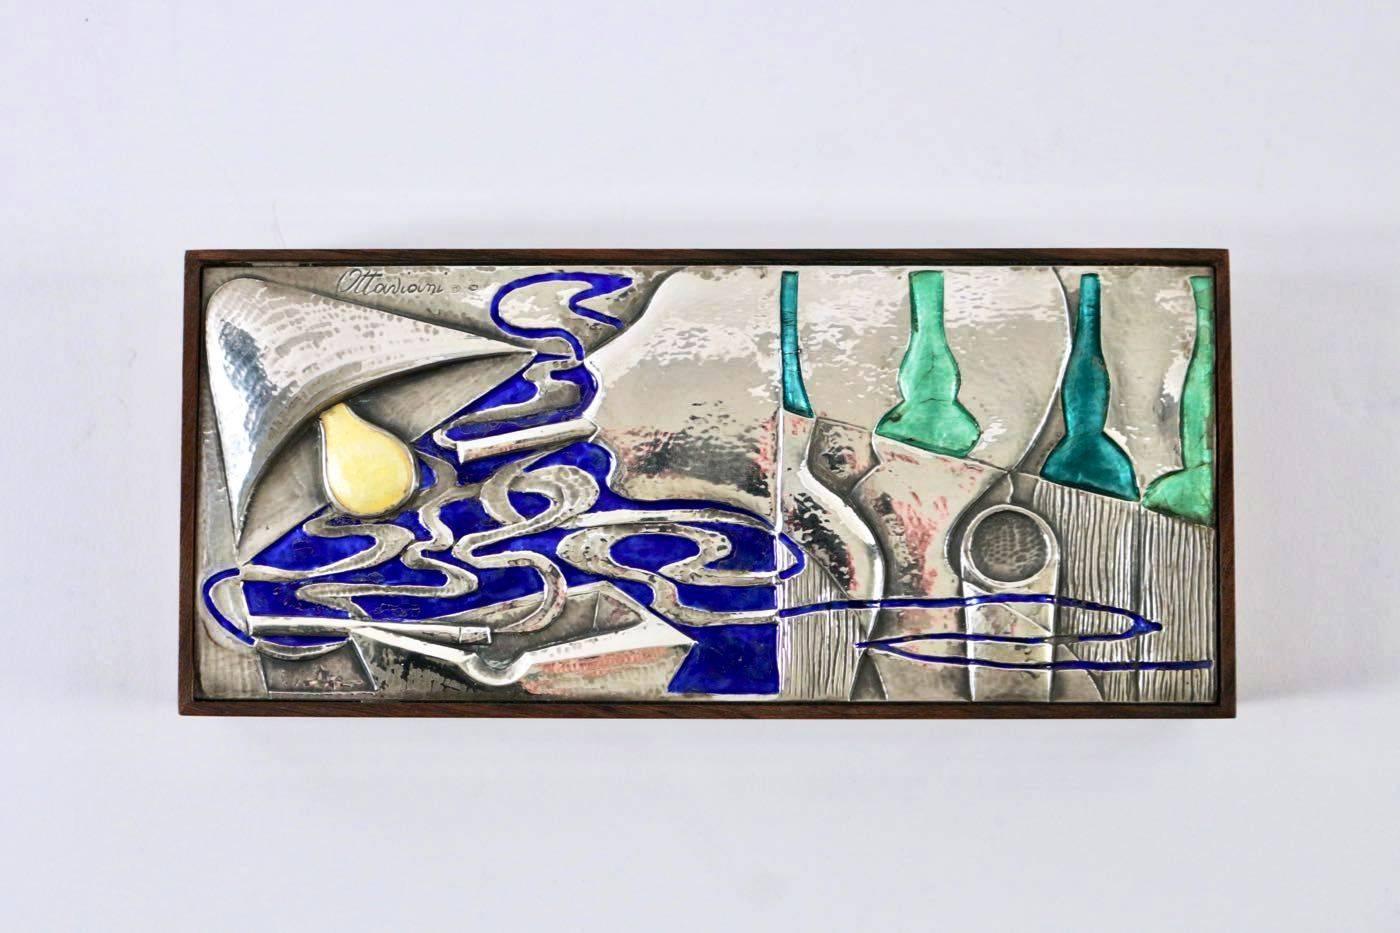 Sublime wood jewelry box by Ottaviani, sterling silver 925 and enamel top, Italy, 1960s
One of a kind piece
Ottaviani was a well-known italian workshop that did marvellous work in enamel and silver. Started in 1945 in the small seaside town of